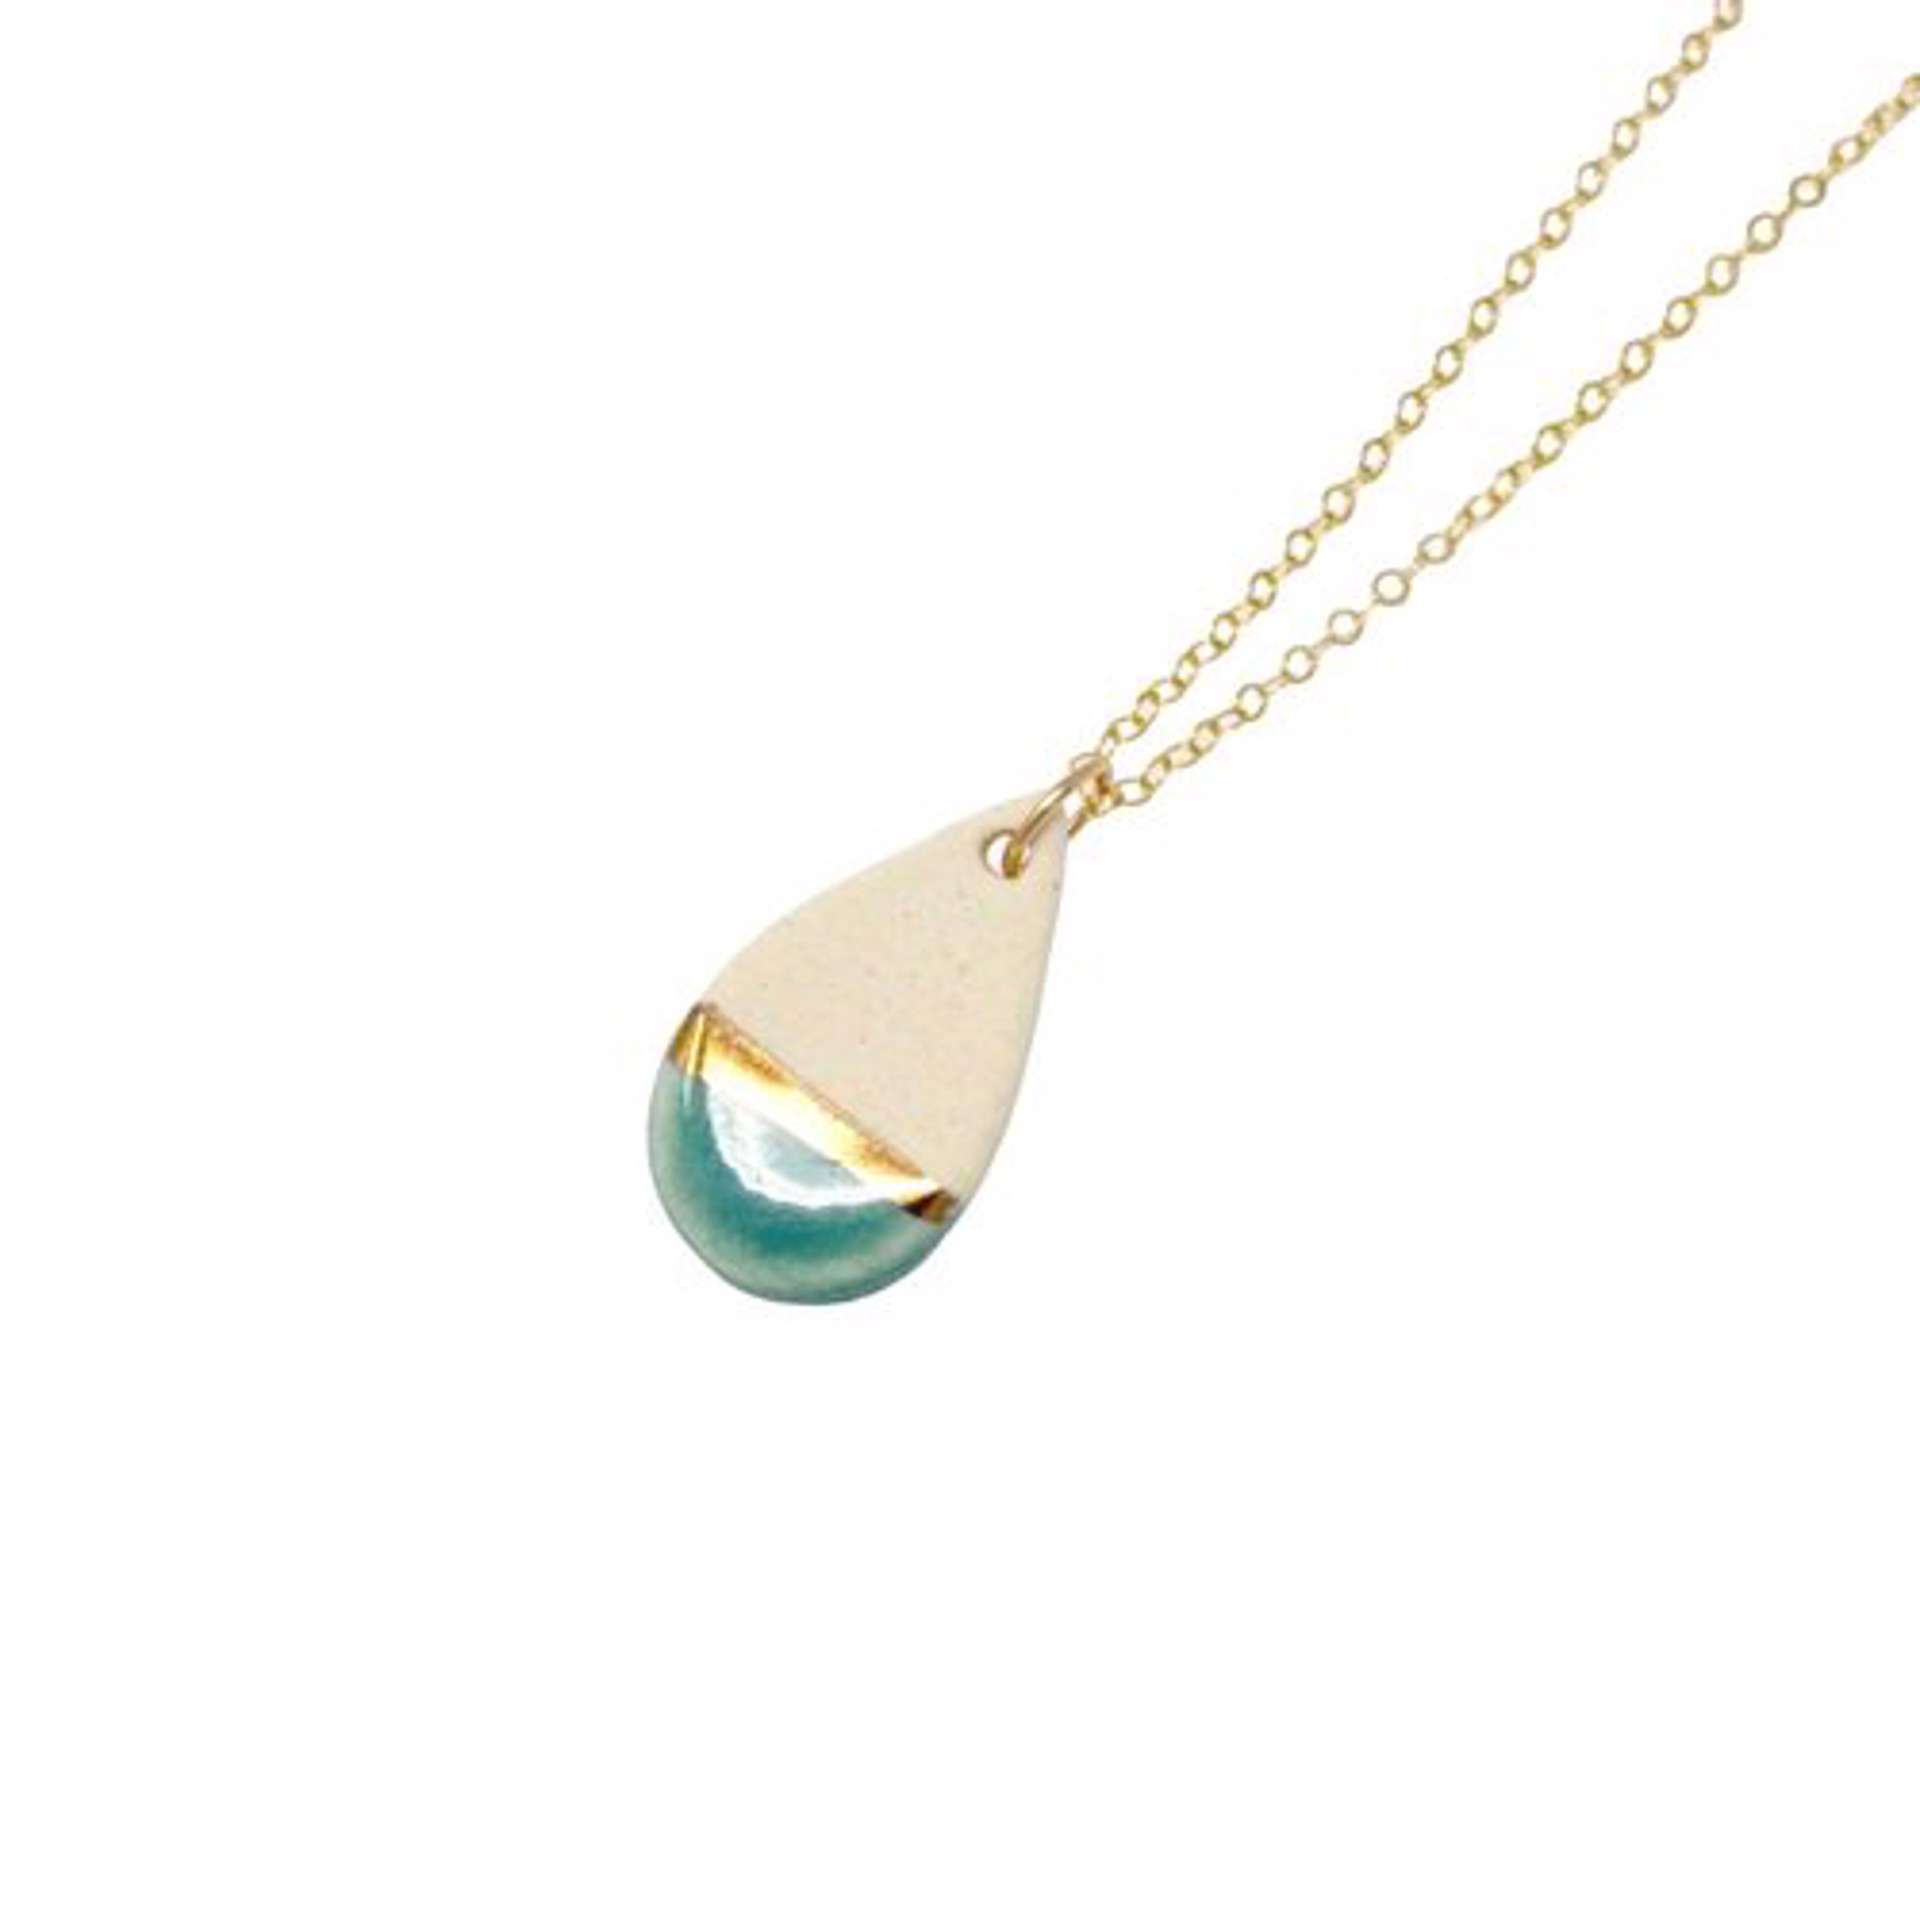 Teardrop Necklace - Teal/Gold Line by Zoe Comings